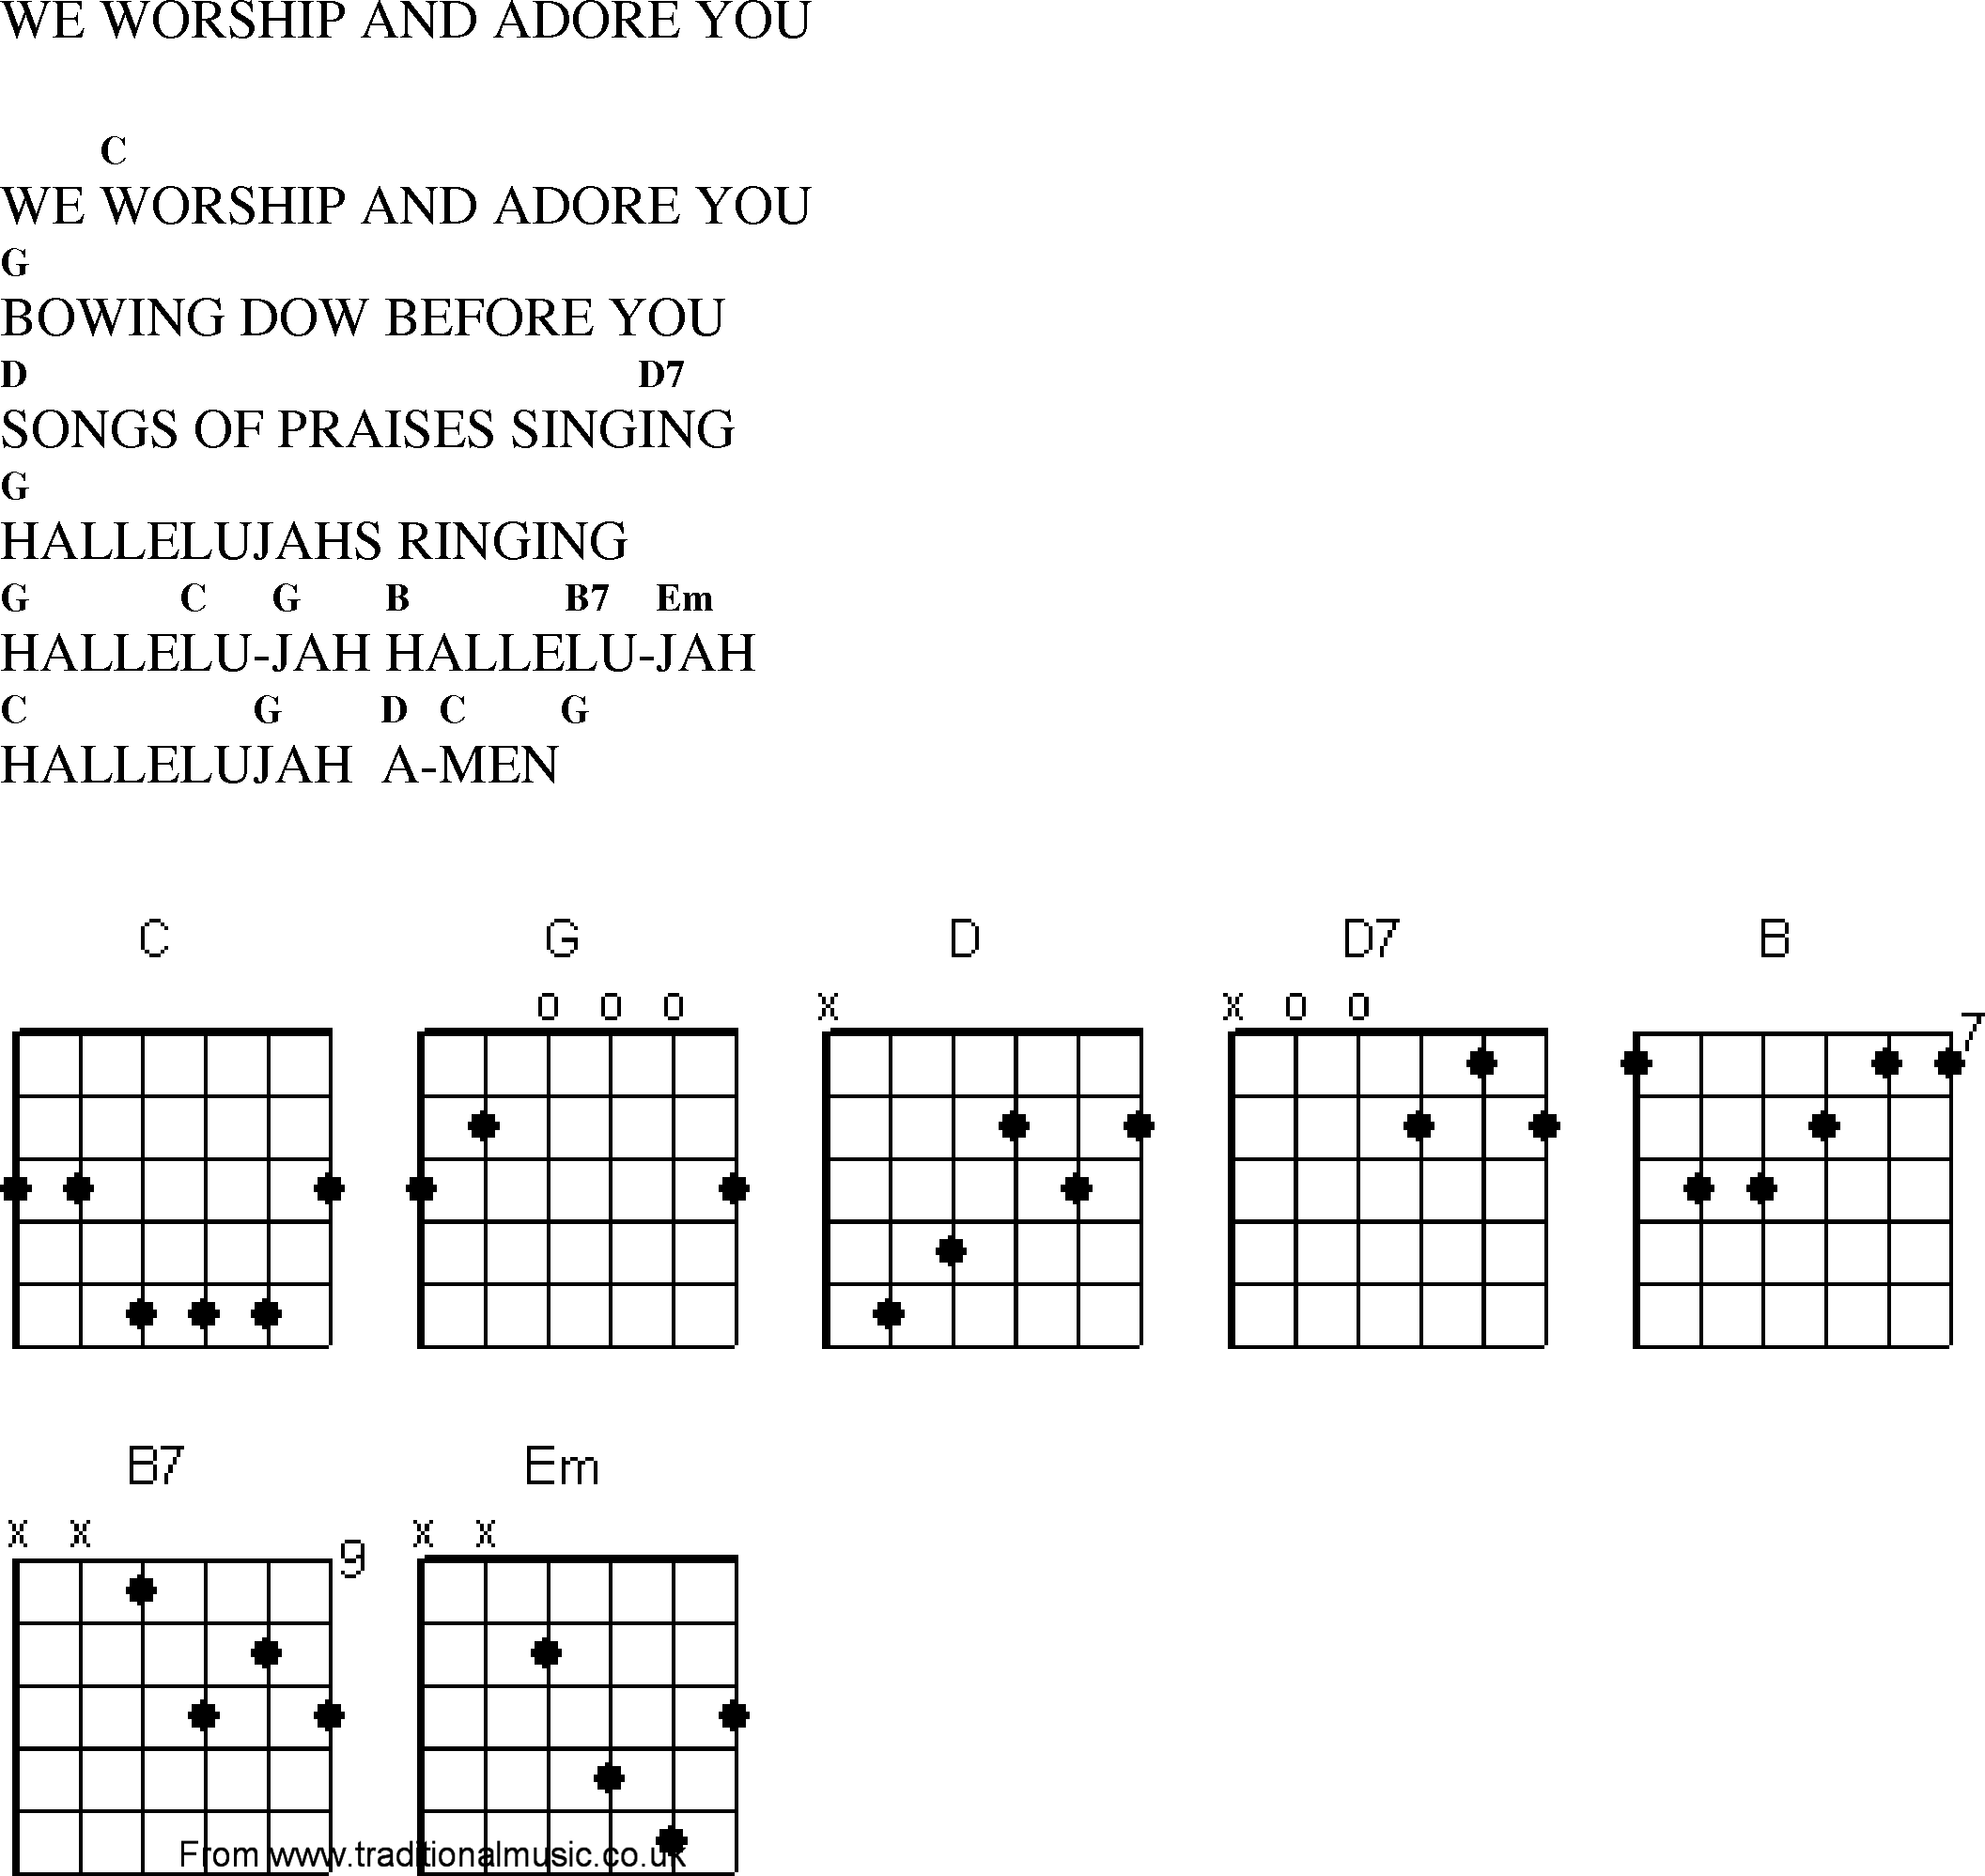 Gospel Song: we_worship_and_adore_you, lyrics and chords.